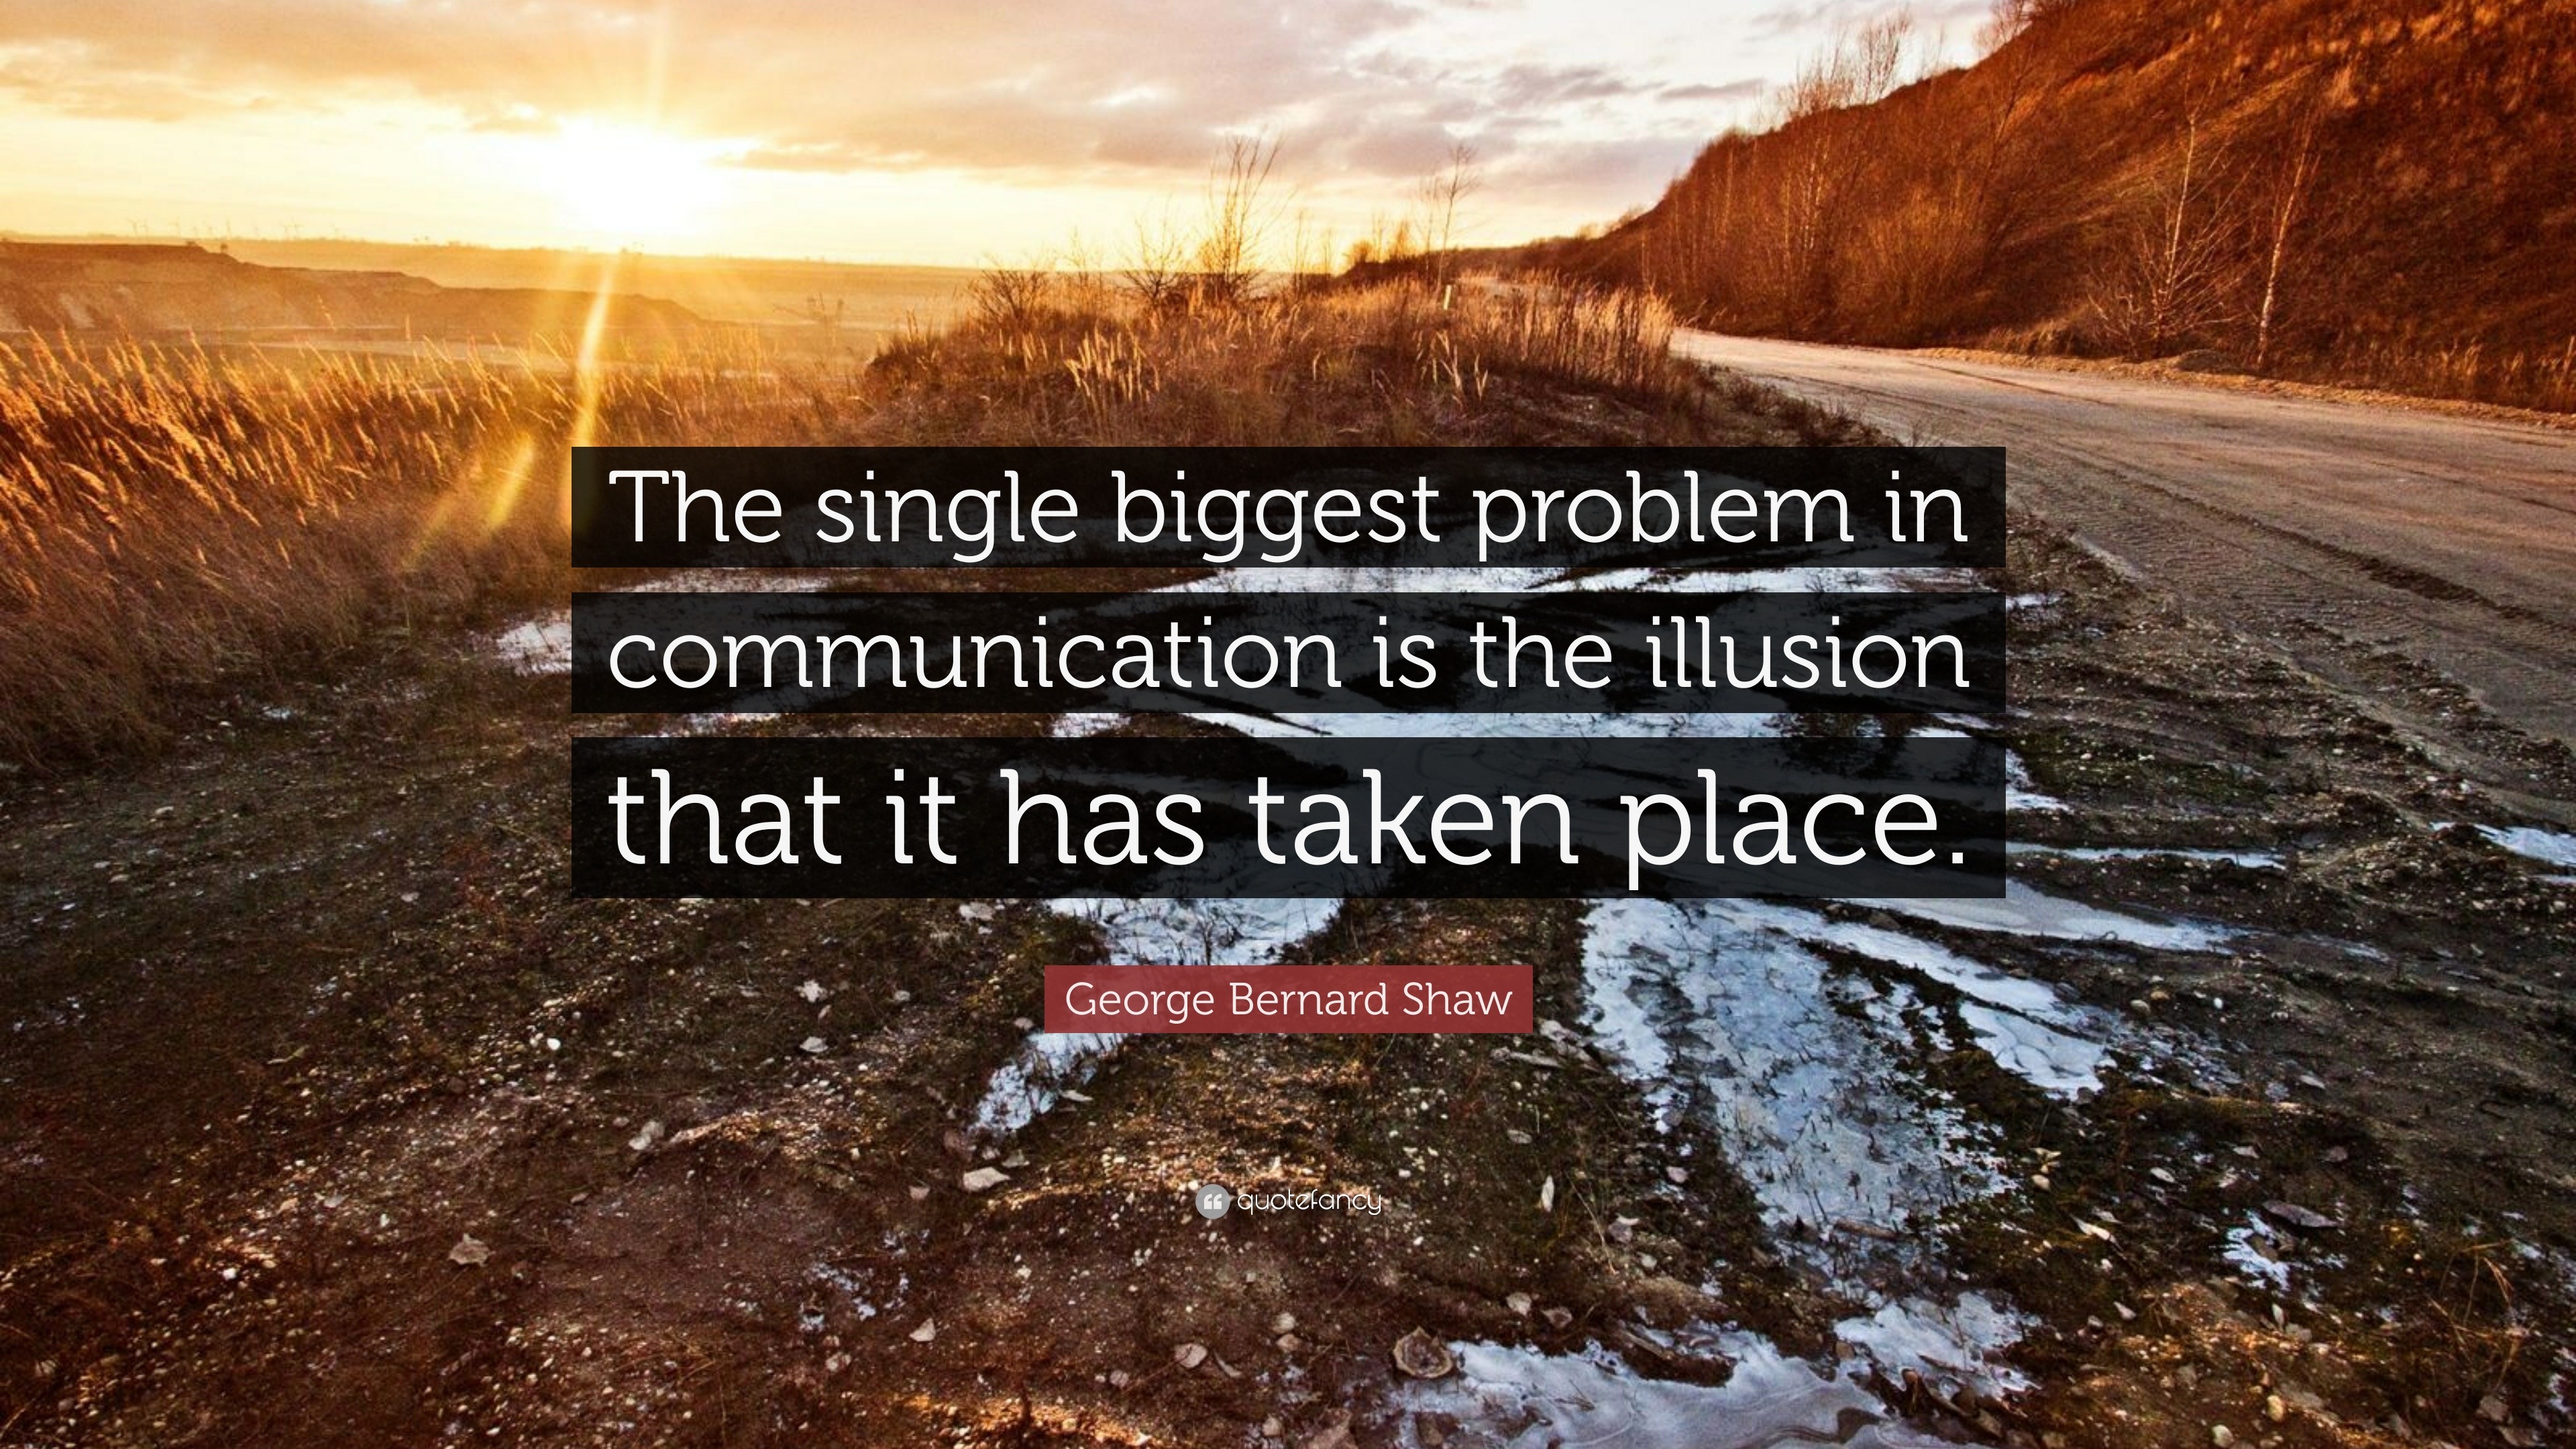 the single biggest problem in communication is the illusion that it has taken place source)